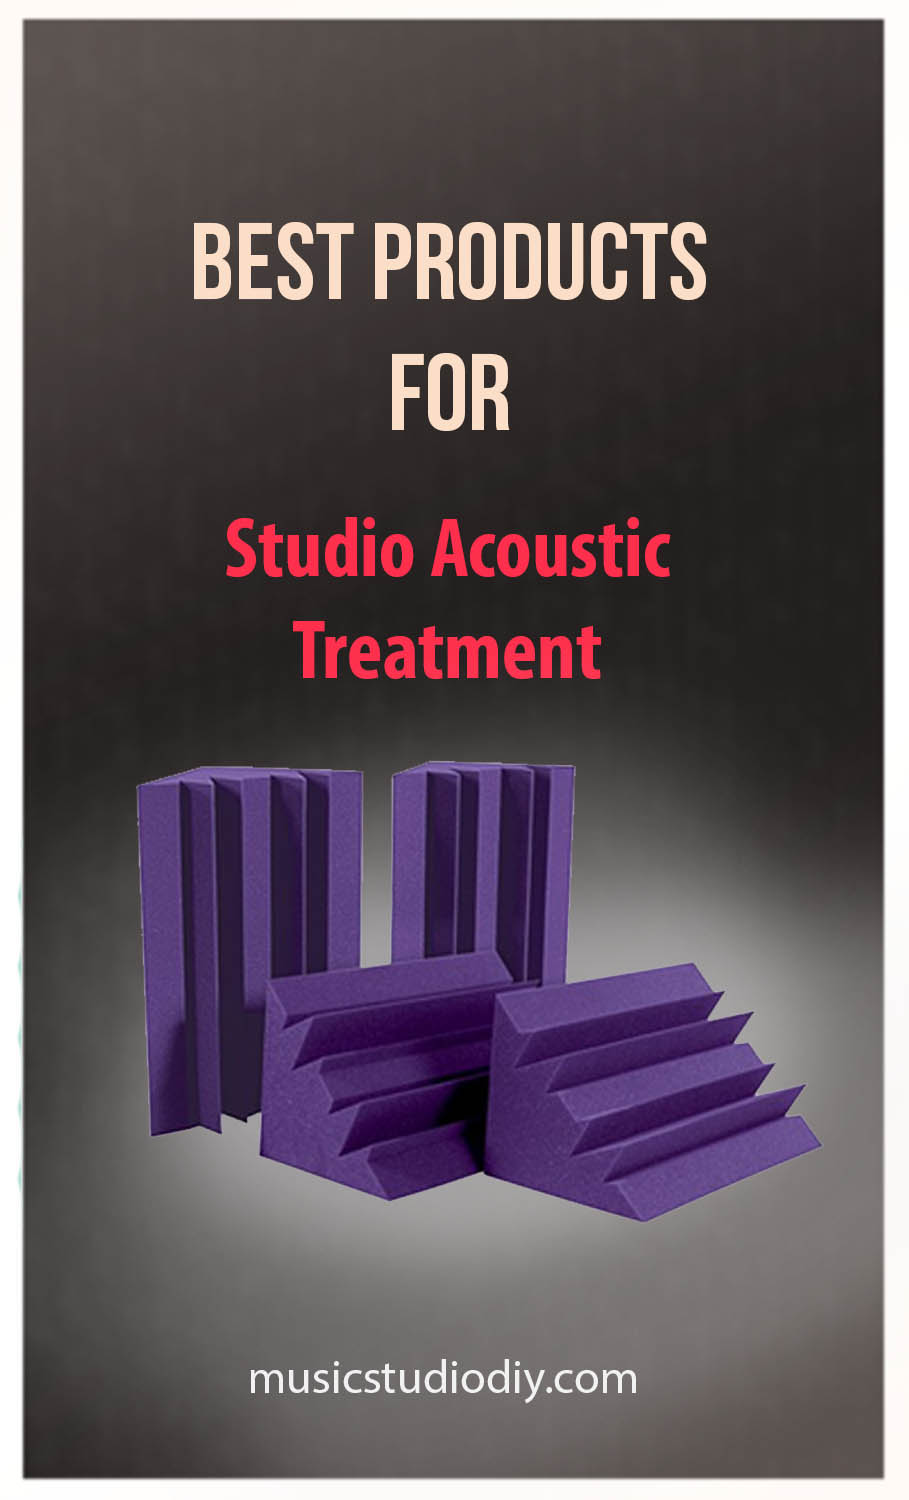 Products for Music Studio Acoustic Treatment